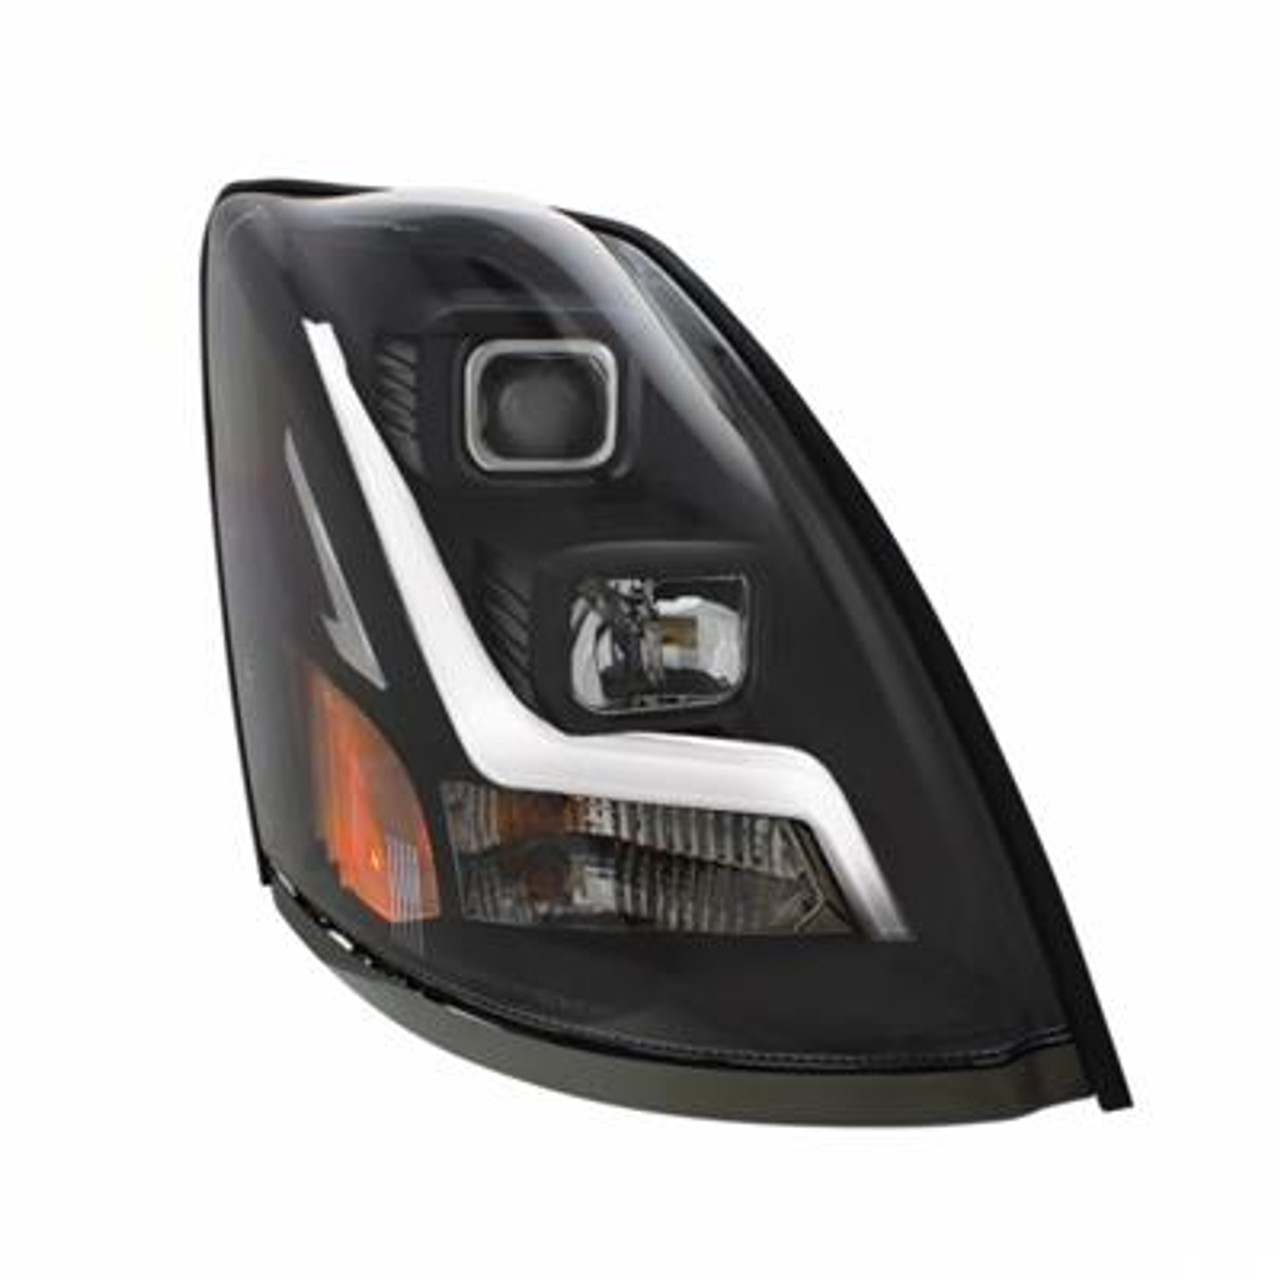 United Pacific makes a variety of headlight assemblies that will light up the road like never before. Applications are available for Peterbilt, Kenworth, Freightliner, and many more. Our headlights meet regulations for light emission and safety.